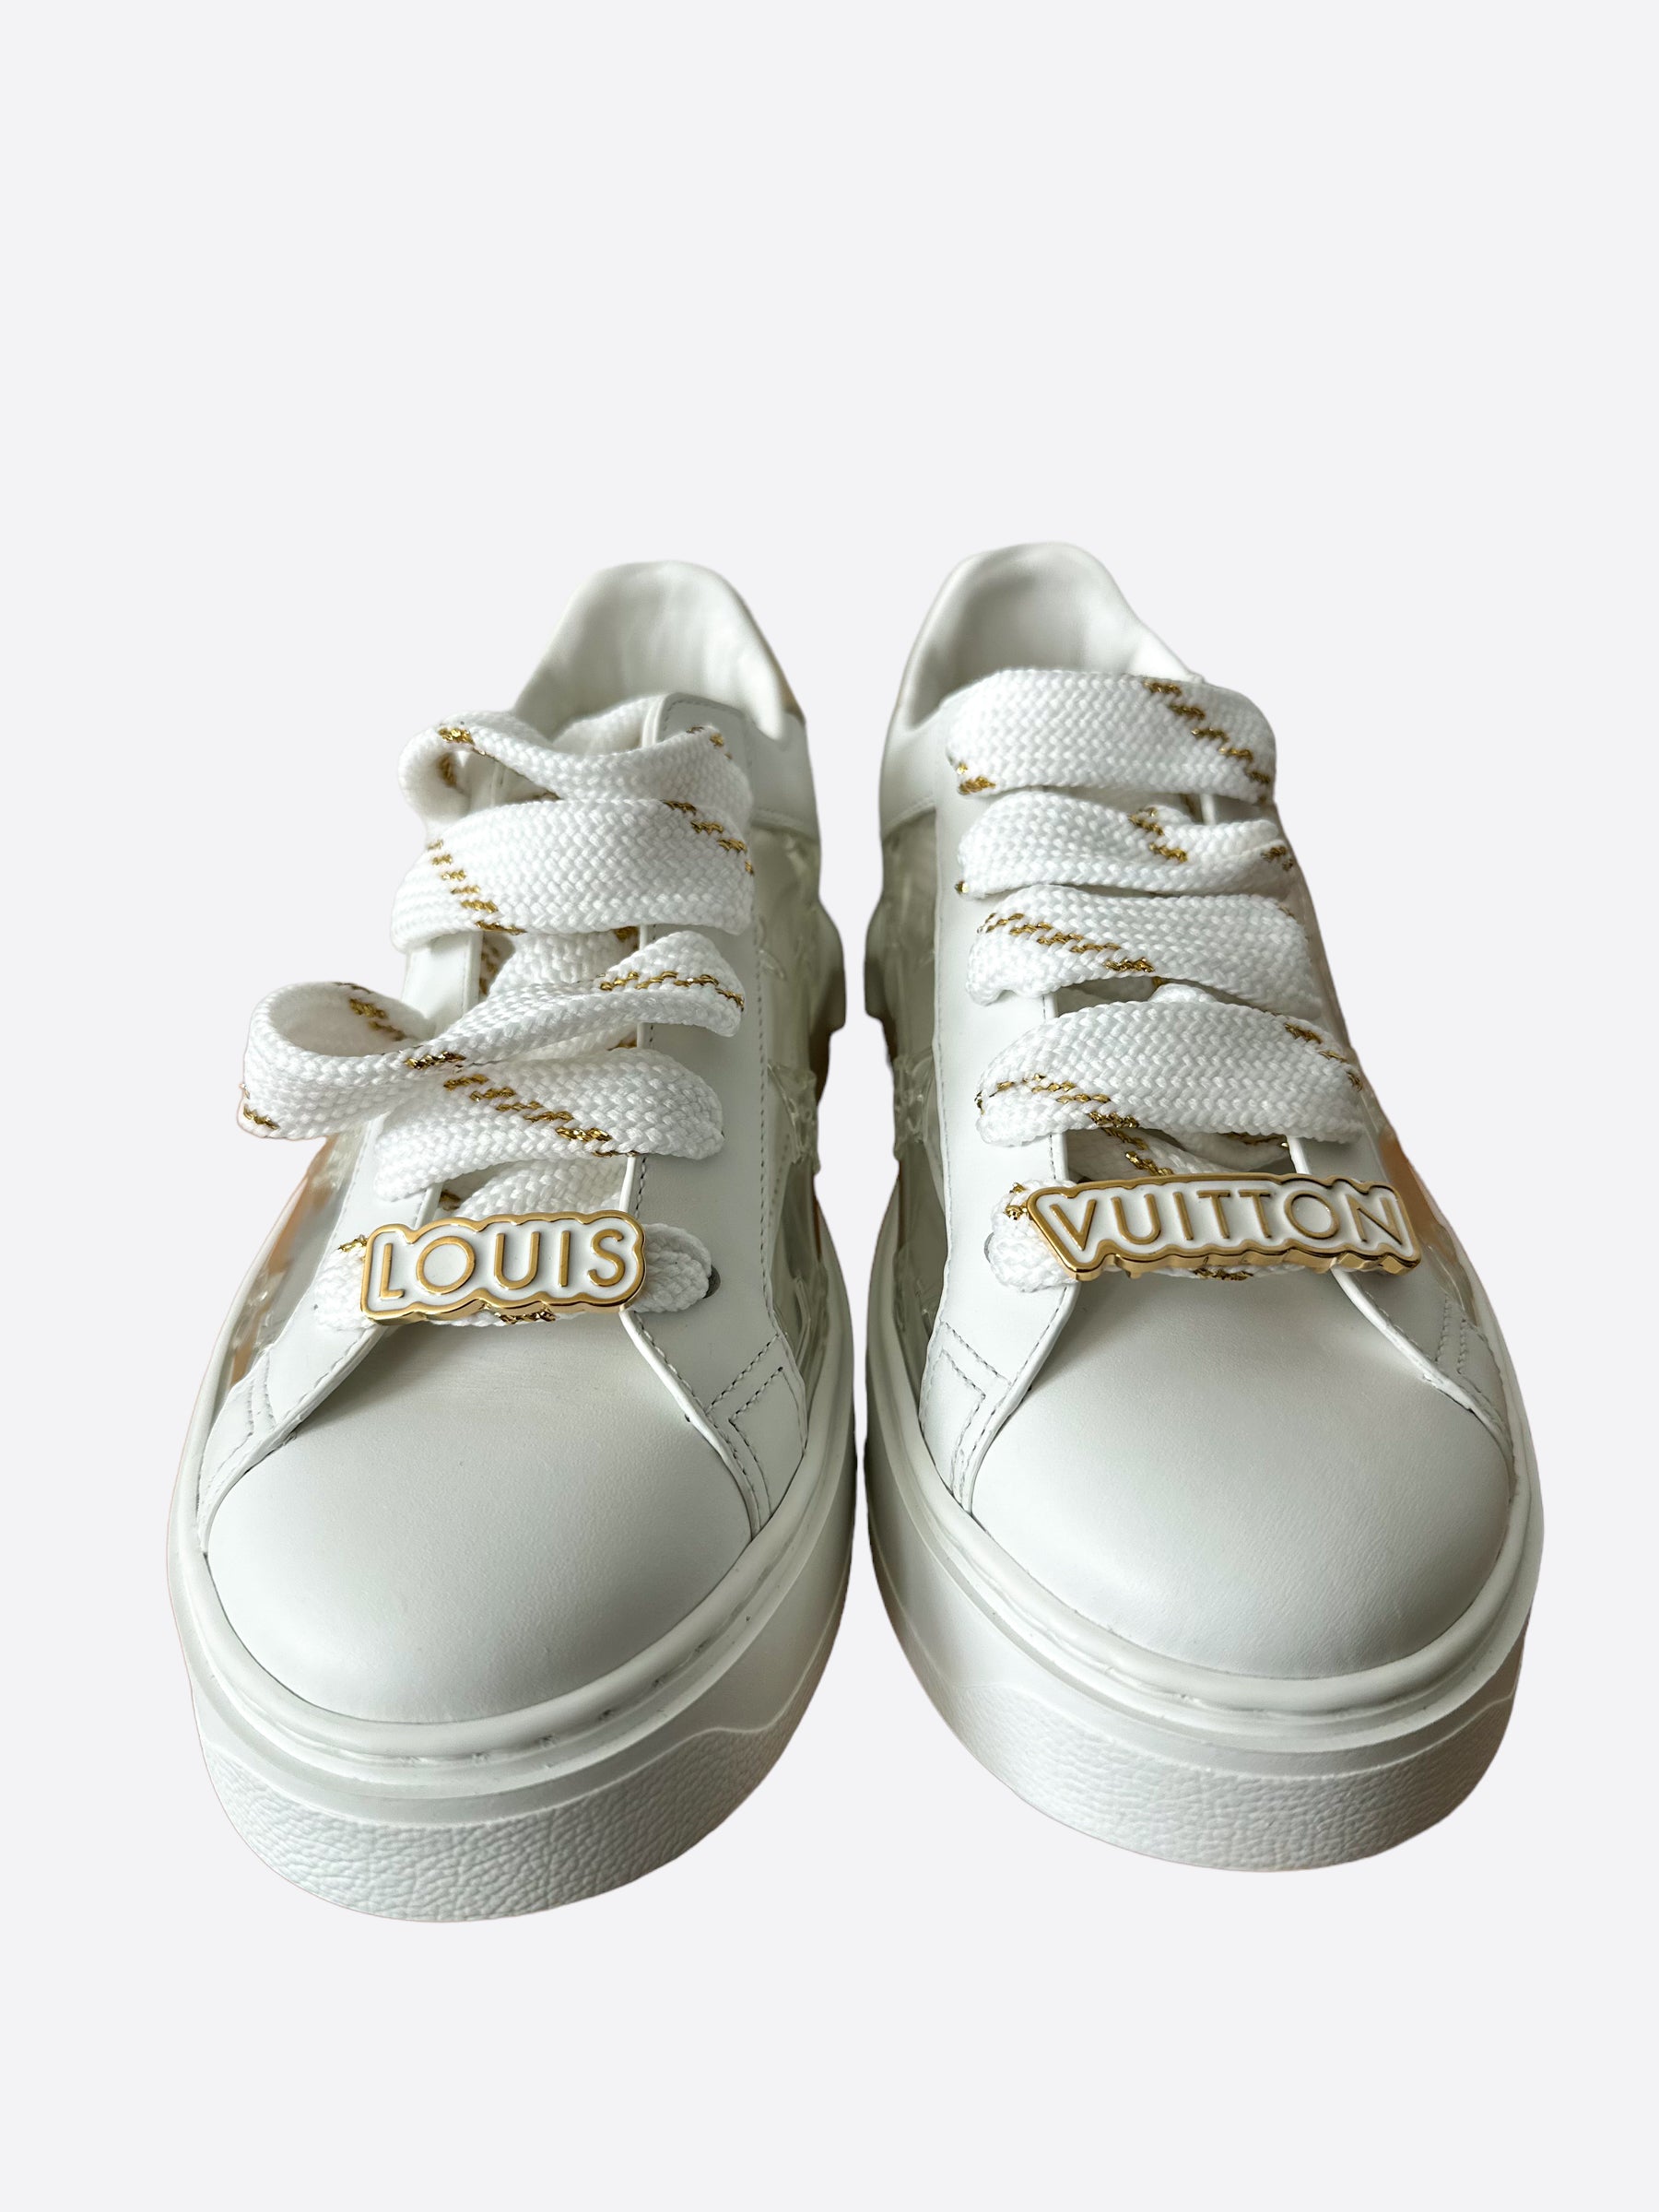 Louis Vuitton Time Out Sneaker Gold. Size 40.0